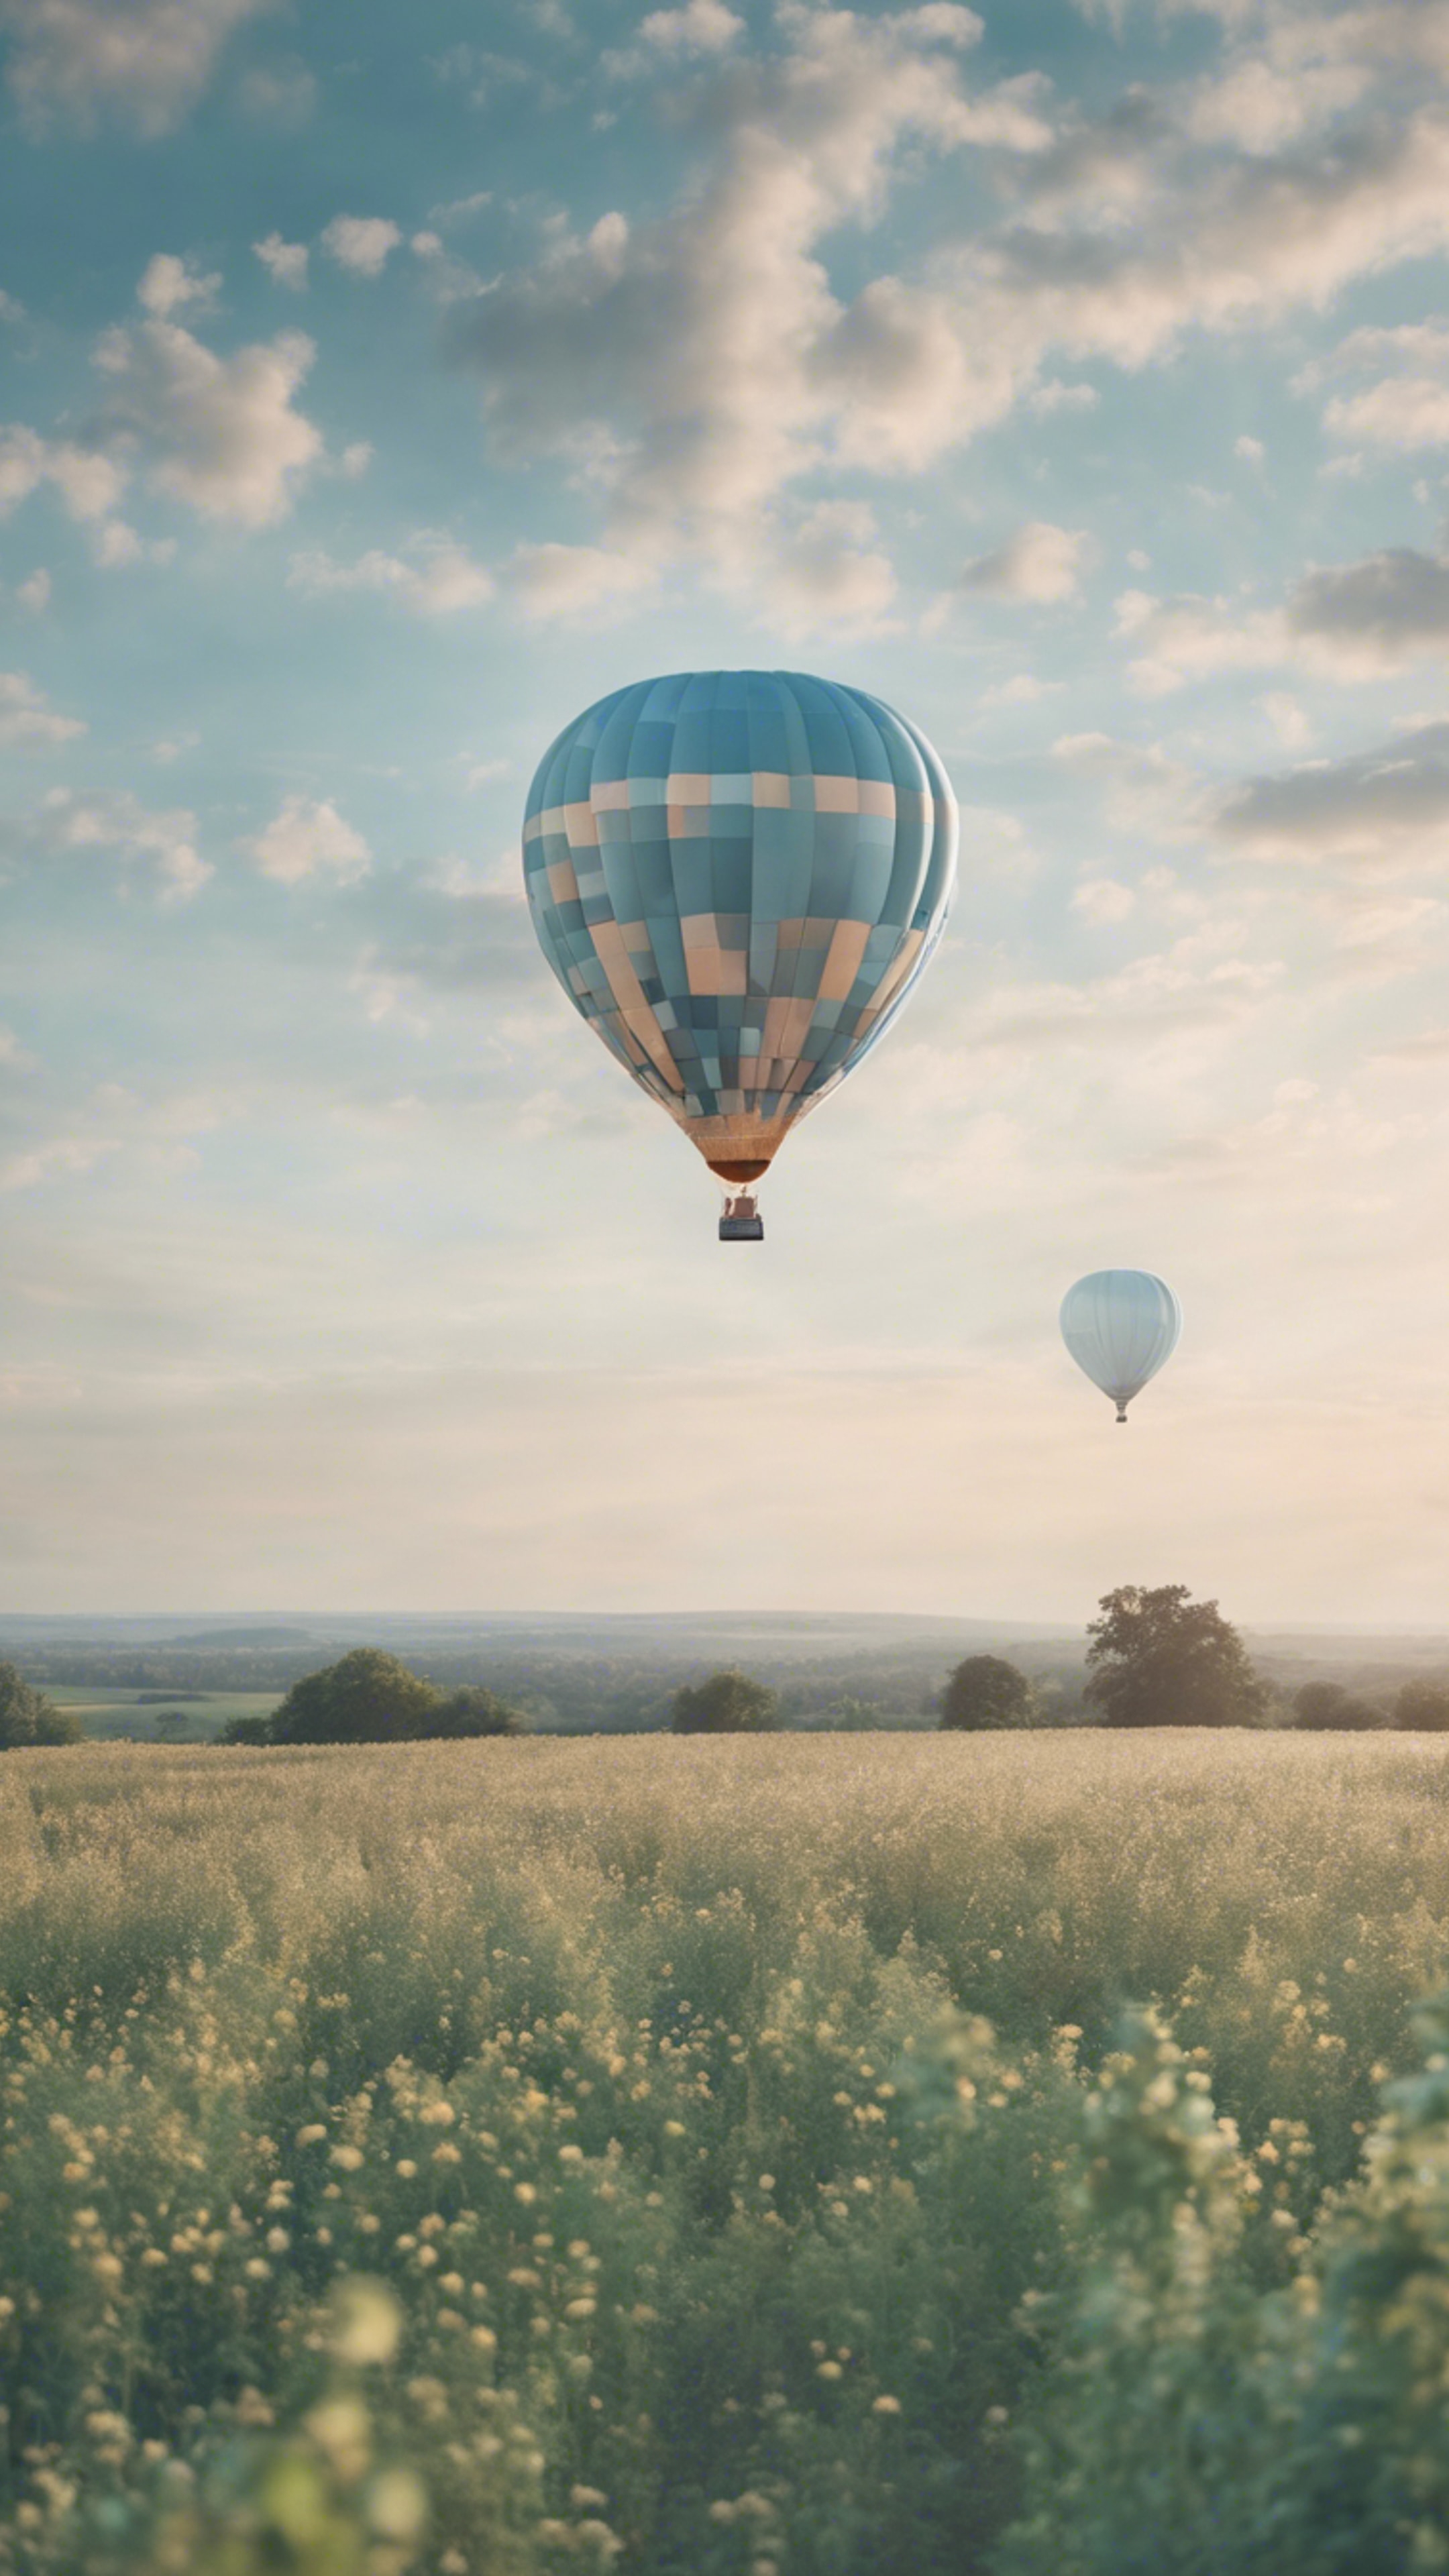 A pastel blue hot air balloon floating serenely above a patchwork field. Fond d'écran[b19c340976c044f4b3c6]